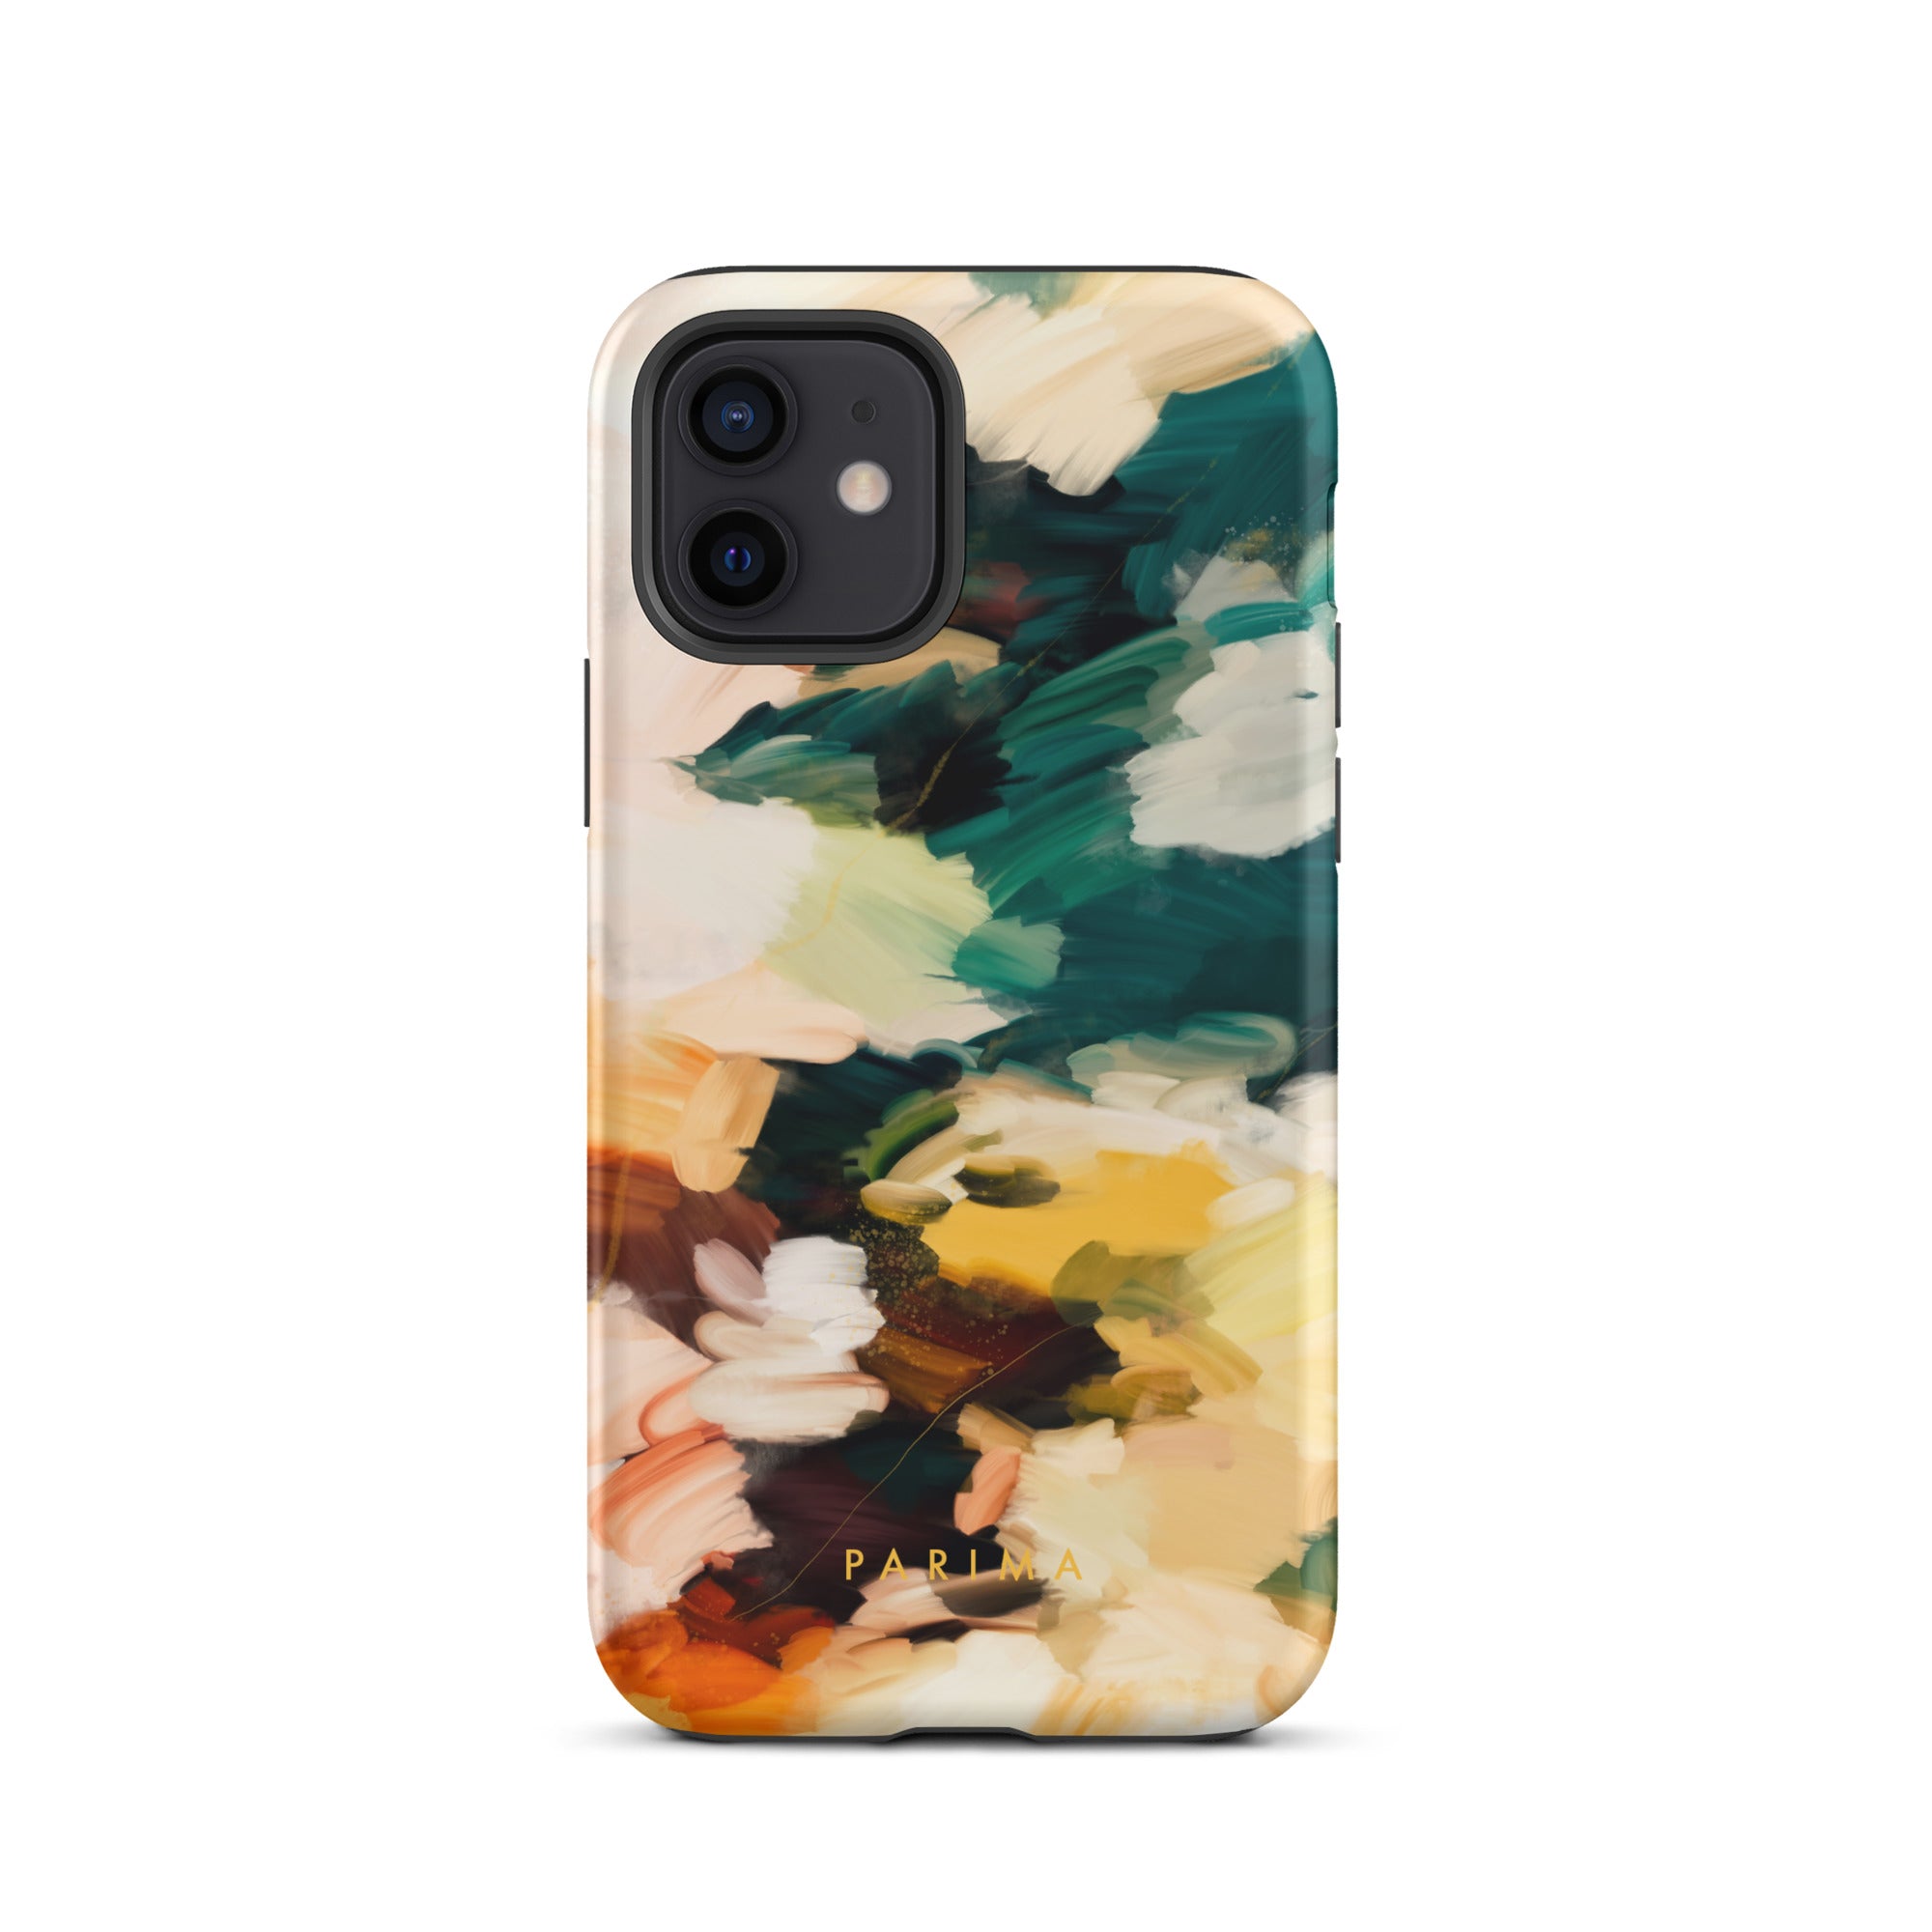 Cinque Terre, green and yellow abstract art - iPhone 12 tough case by Parima Studio